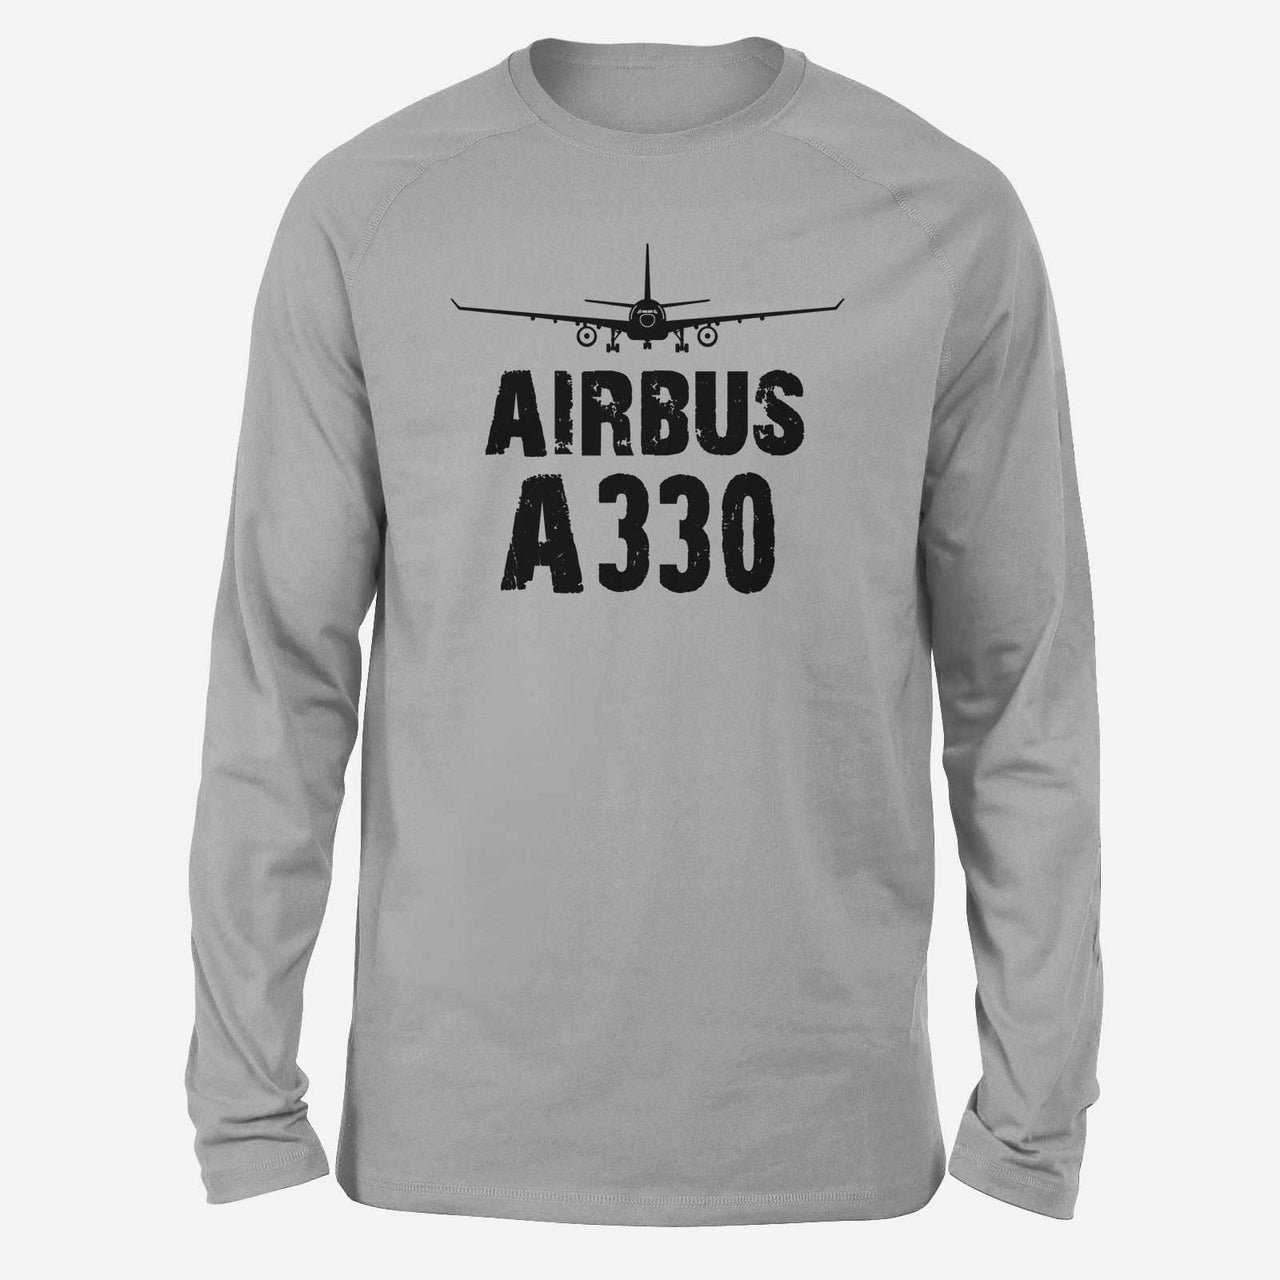 Airbus A330 & Plane Designed Long-Sleeve T-Shirts